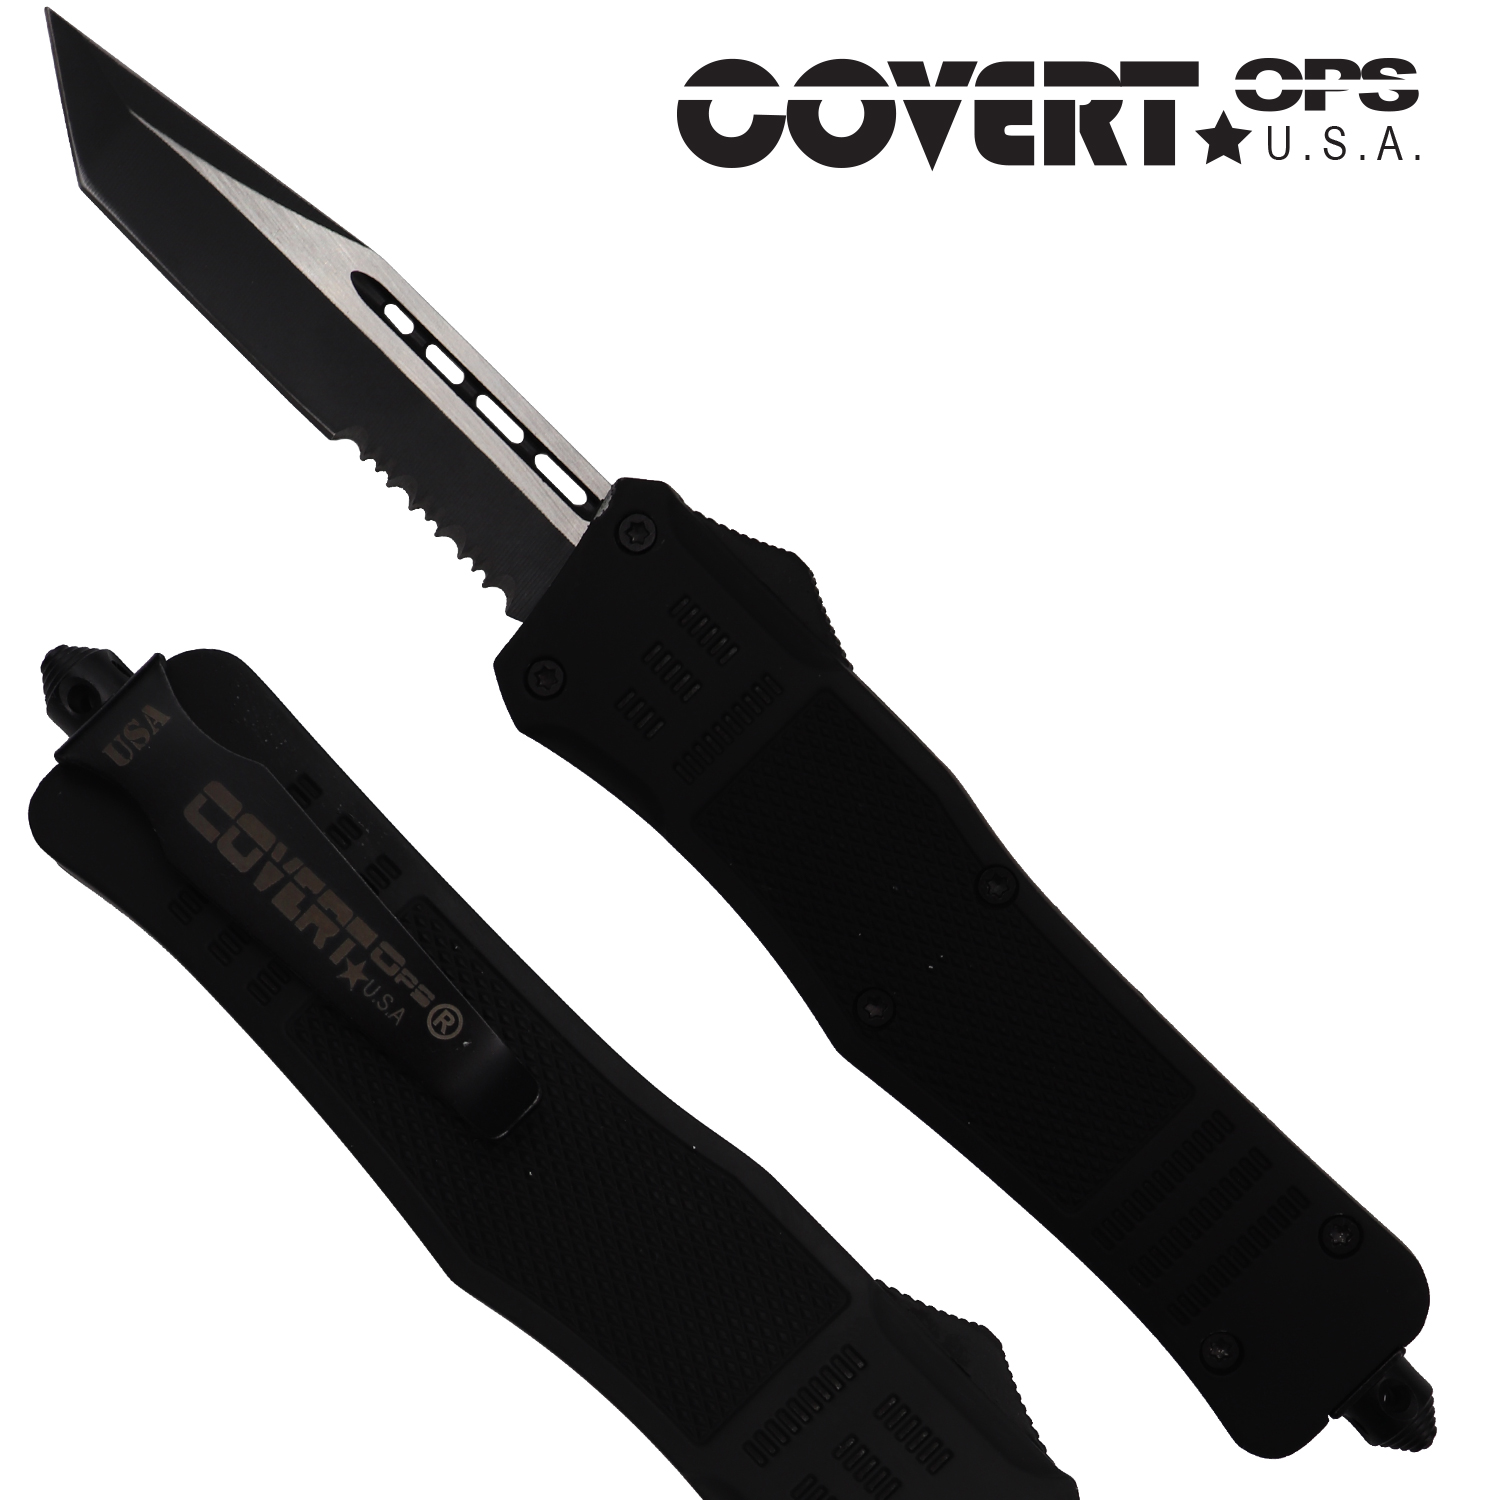 Covert OPS USA OTF Automatic Knife 9 inch overall Black Handle Two Tone Tanto D2 Steel Blade